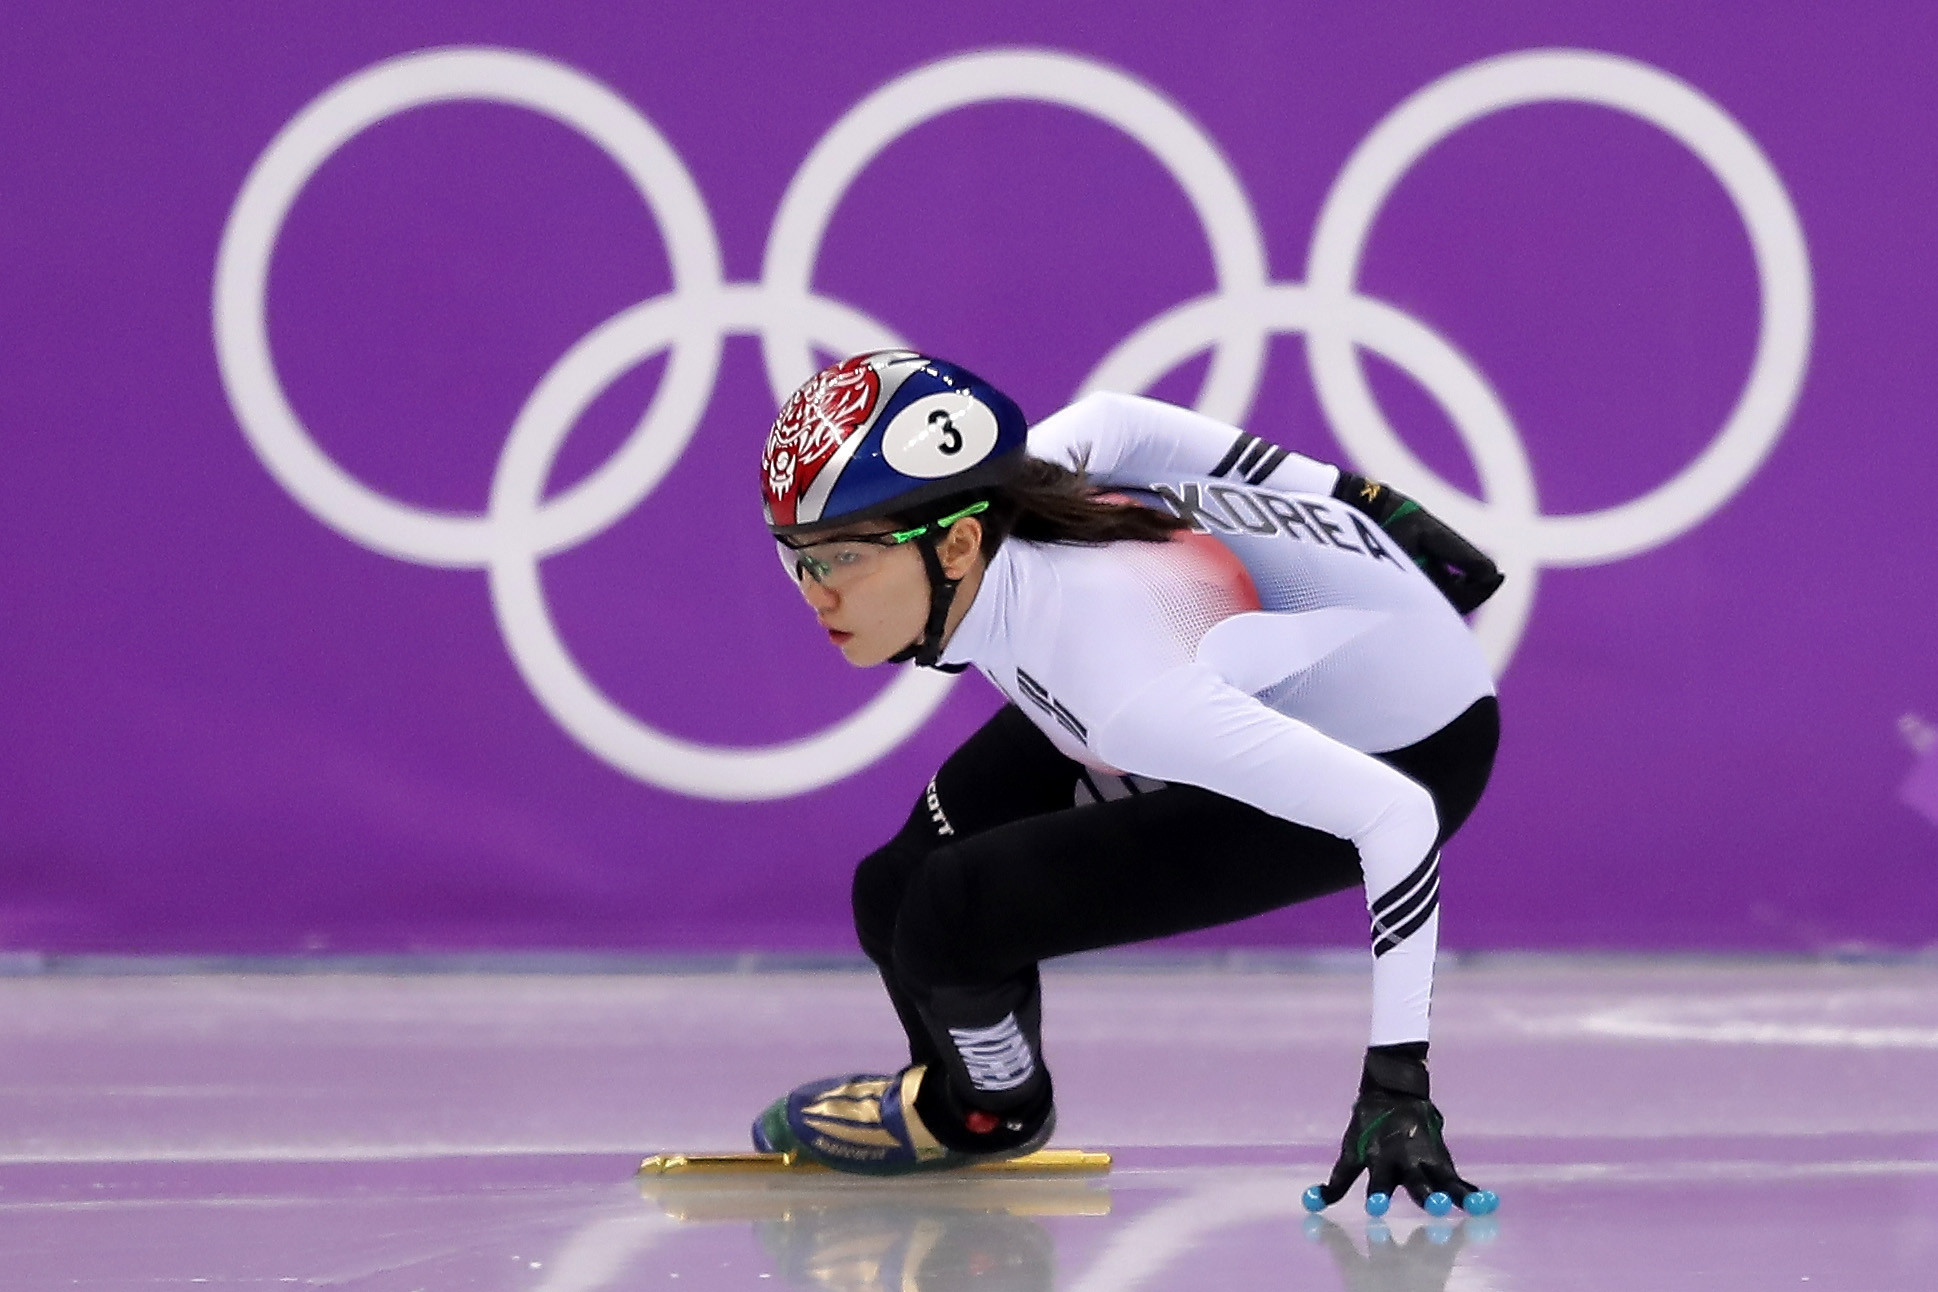 South Korea's Shim Suk-hee, who has accused former coach Cho Jae-beom of sexually and physically assaulting her, is Olympic champion in the 3,000m relay short track speed skating event ©Getty Images